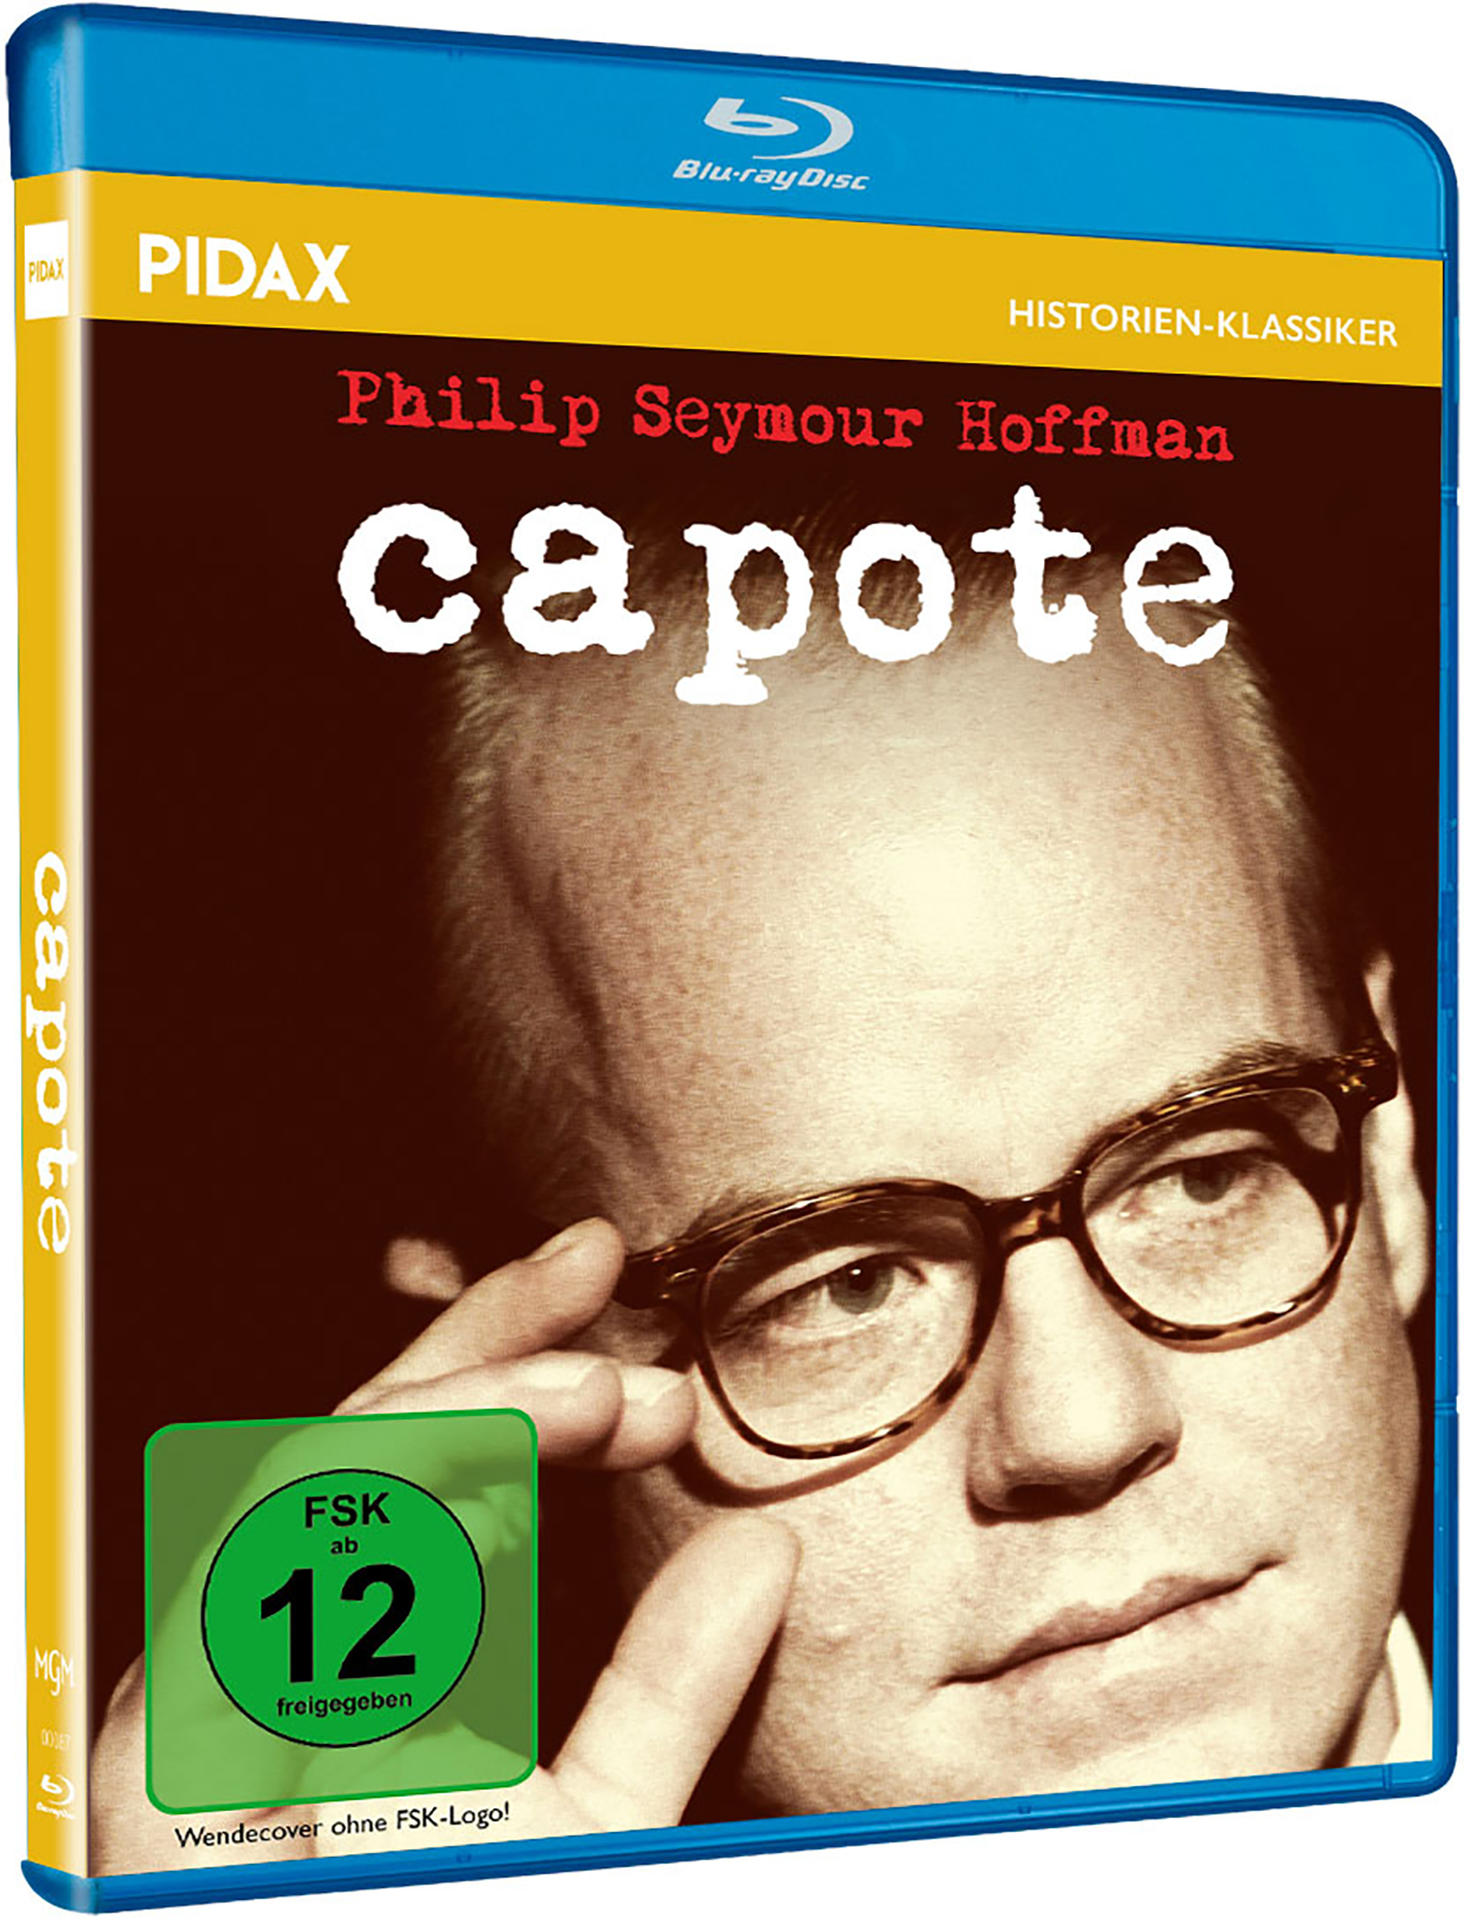 - Remastered Capote Blu-ray Edition